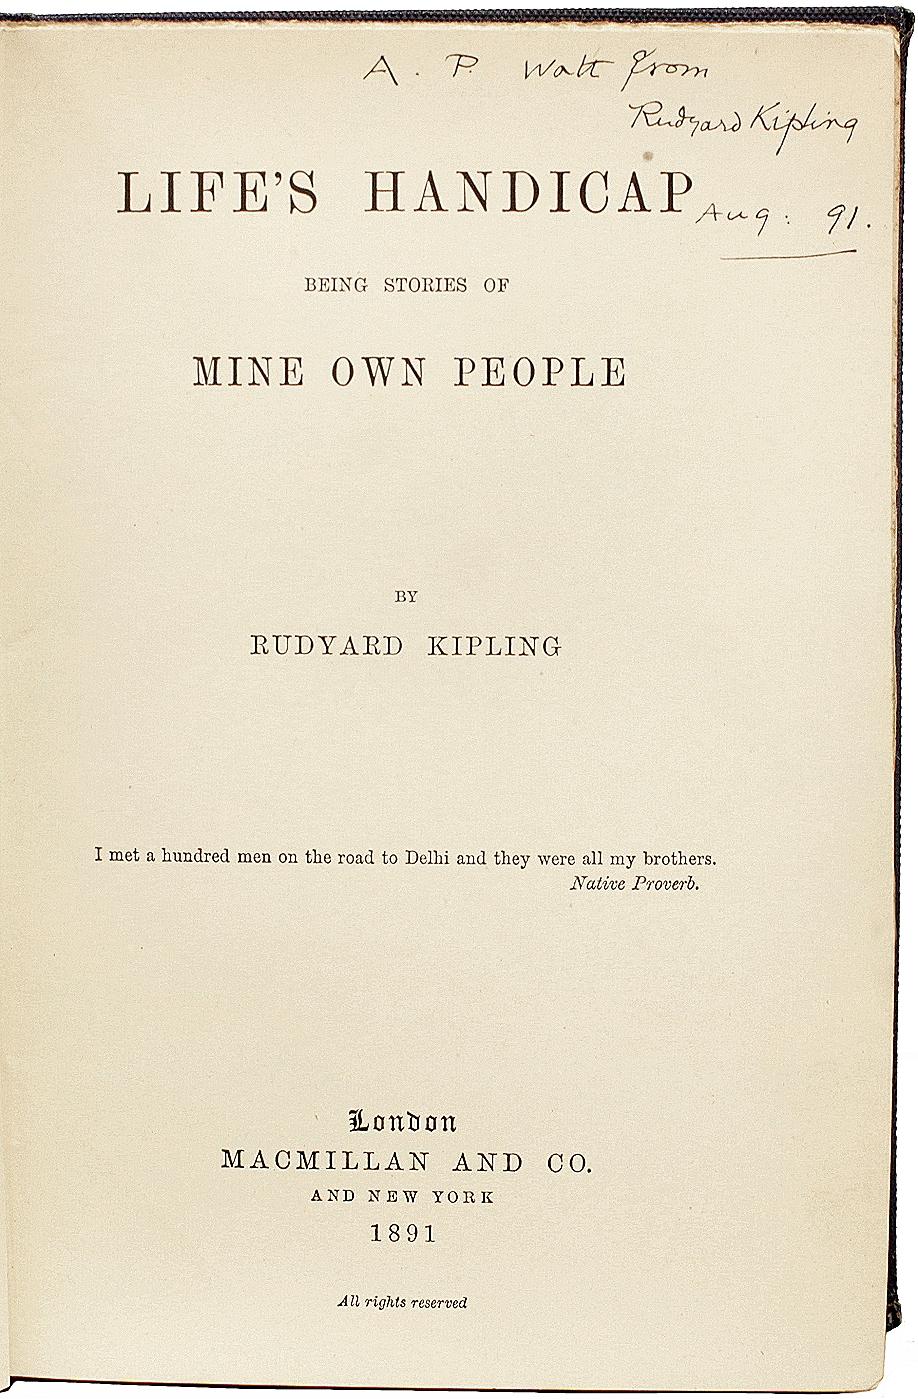 AUTHOR: KIPLING, Rudyard. 

TITLE: Life's Handicap Being Stories Of Mine Own People.

PUBLISHER: London: Macmillan & Co., 1891.

DESCRIPTION: FIRST EDITION PRESENTATION COPY. 1 vol., inscribed by Kipling on the title-page 